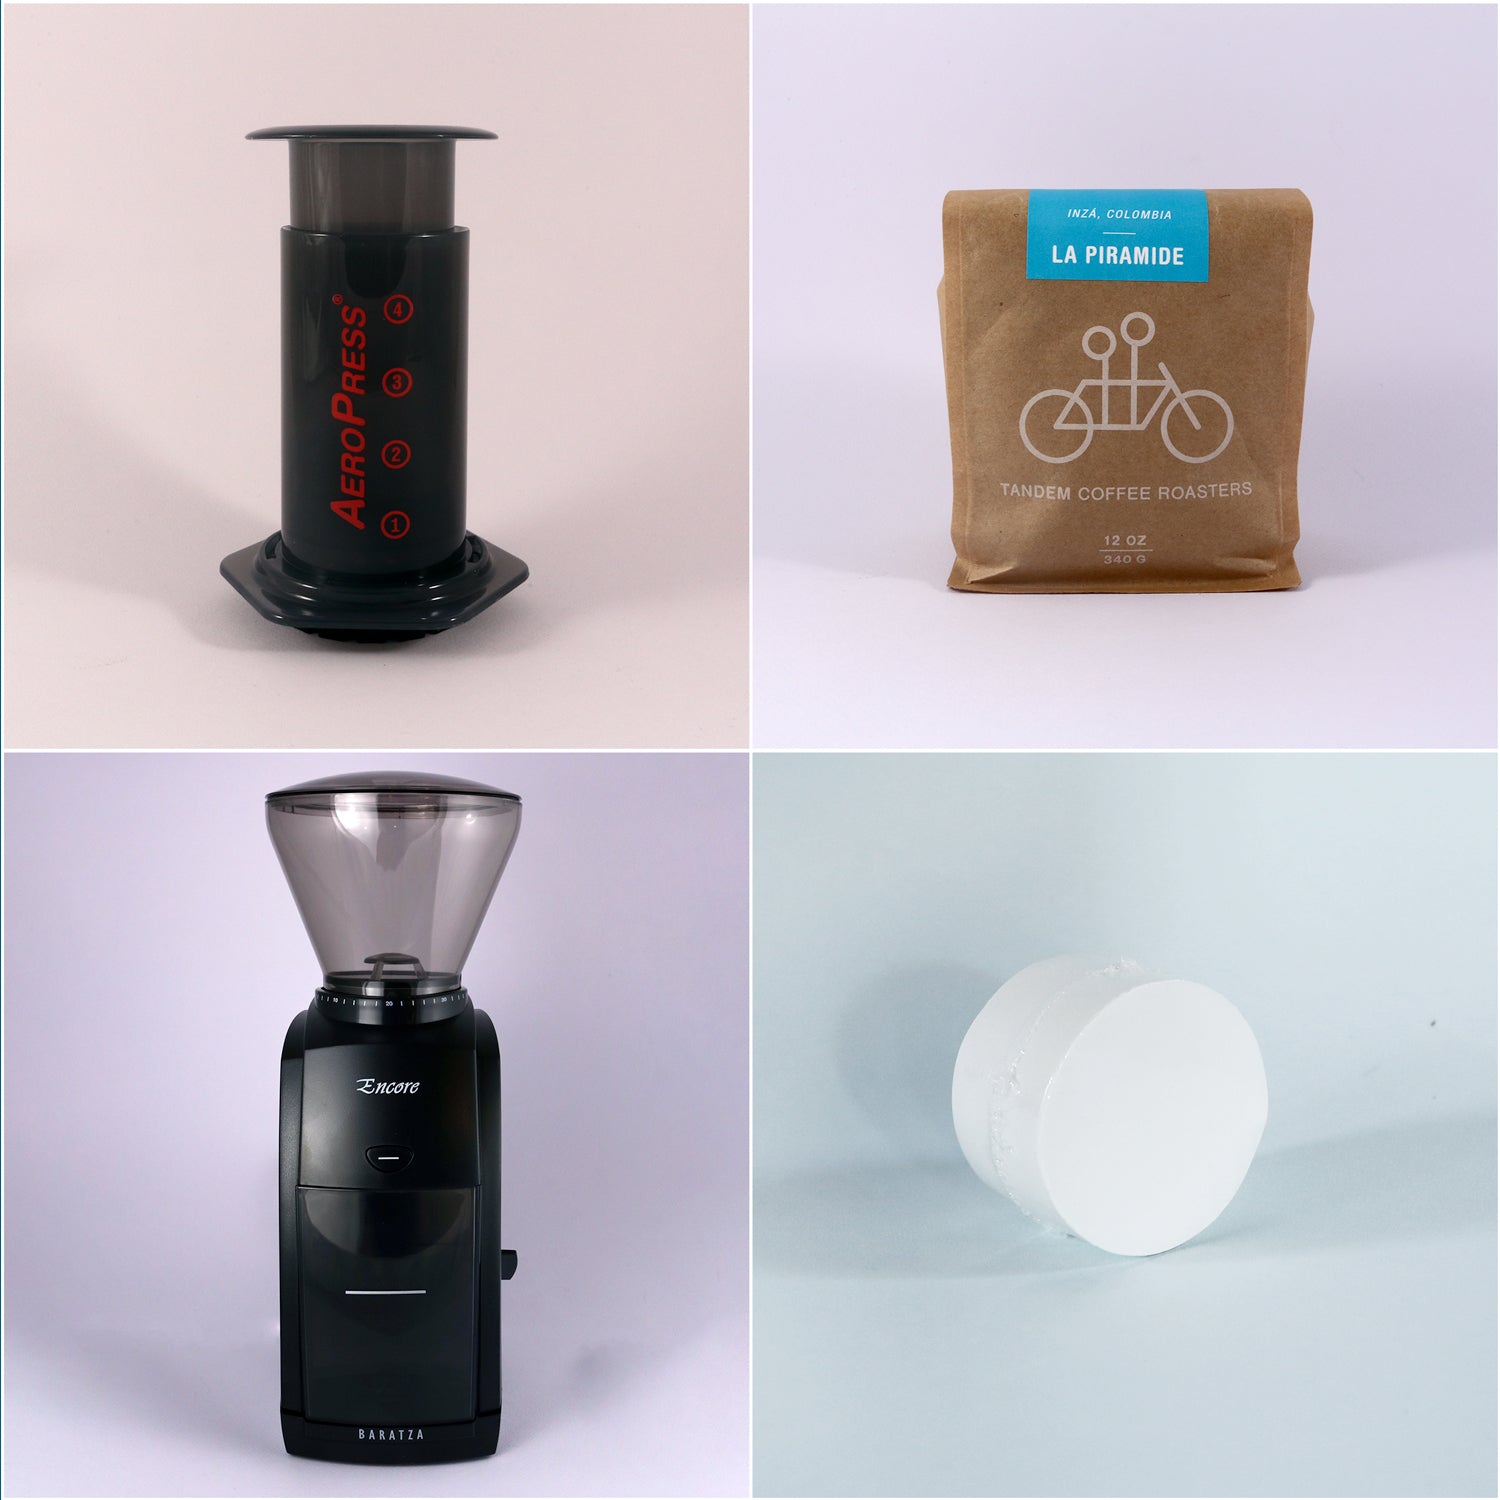 Collage of four images depicting a Tandem Coffee Roasters AeroPress Starter Kit, including the labeled AeroPress device, a bag of freshly roasted coffee beans, and a filter.